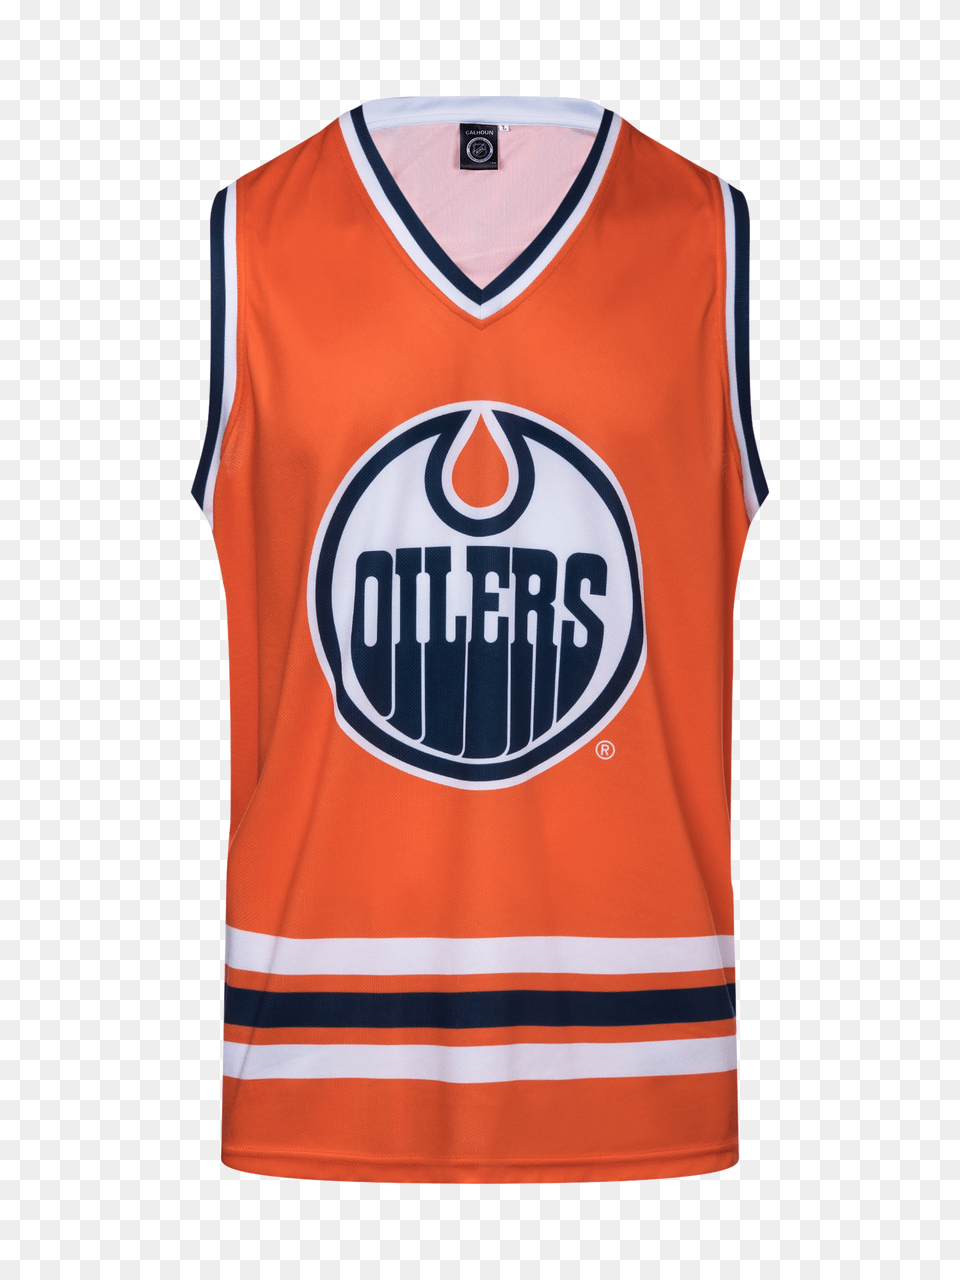 Edmonton Oilers Hockey Tank Bench Clearers, Clothing, Shirt, Jersey, T-shirt Png Image